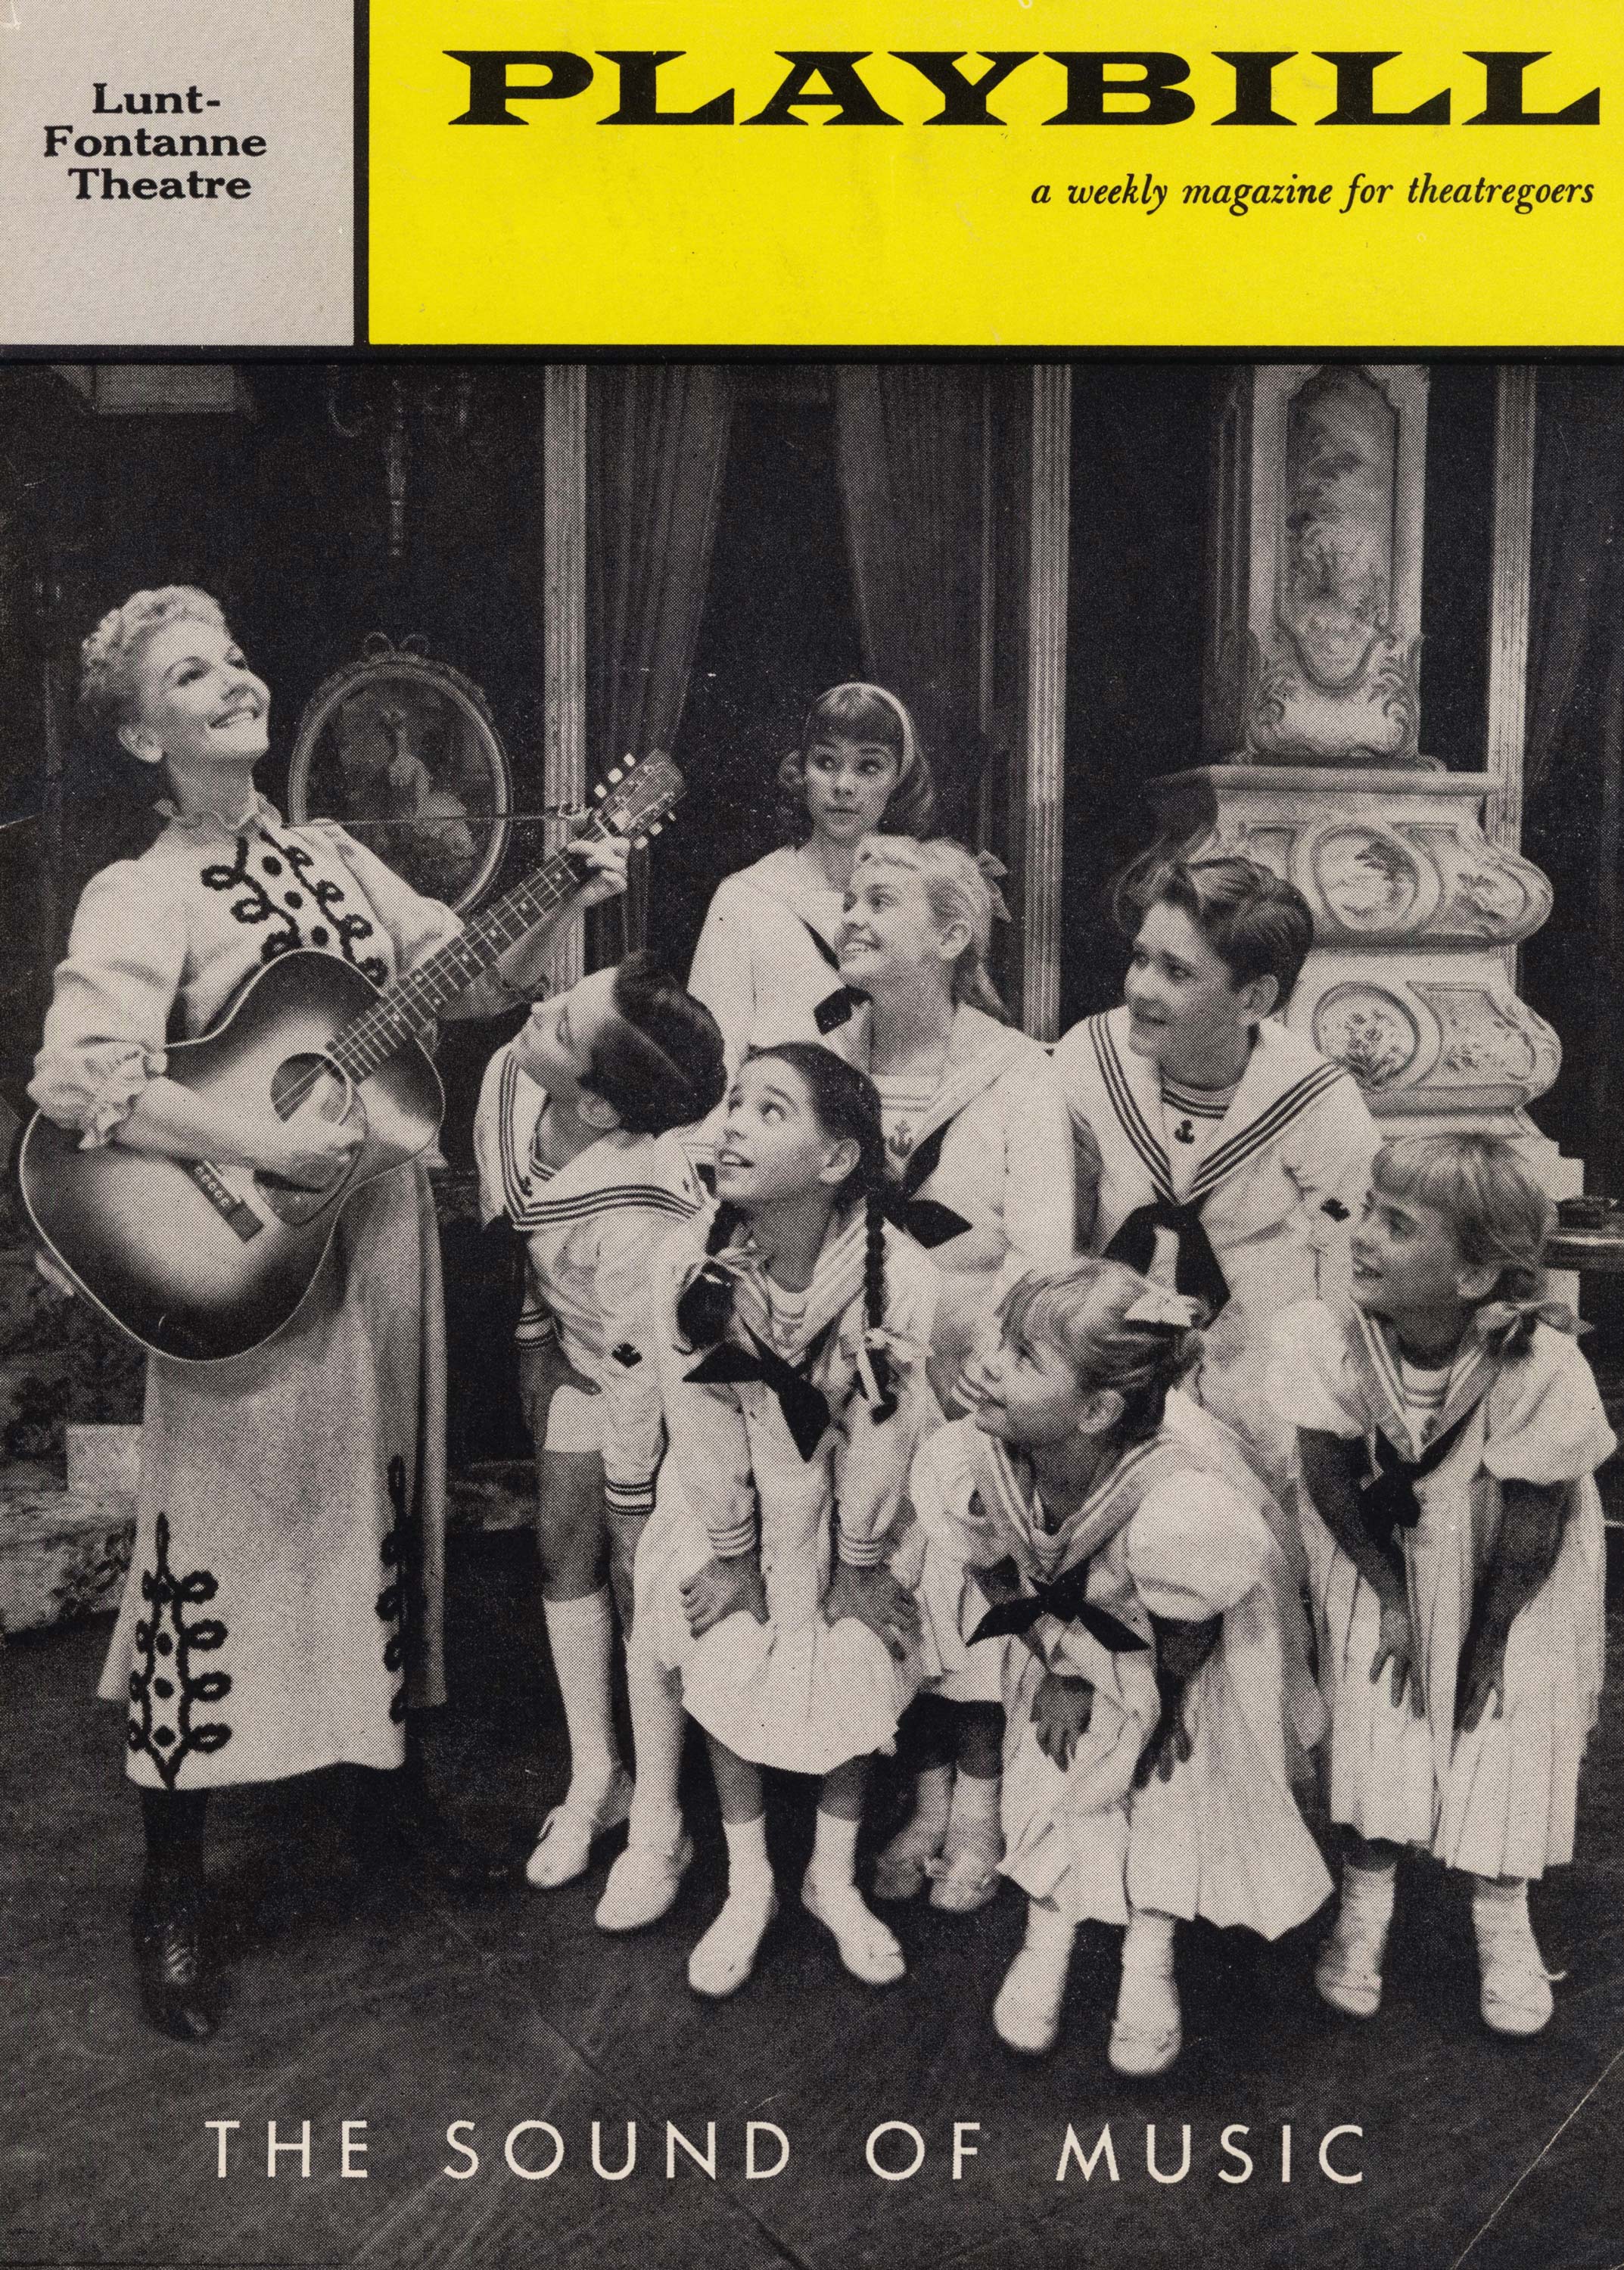 A Playbill from the 1959 Broadway production of The Sound of Music.